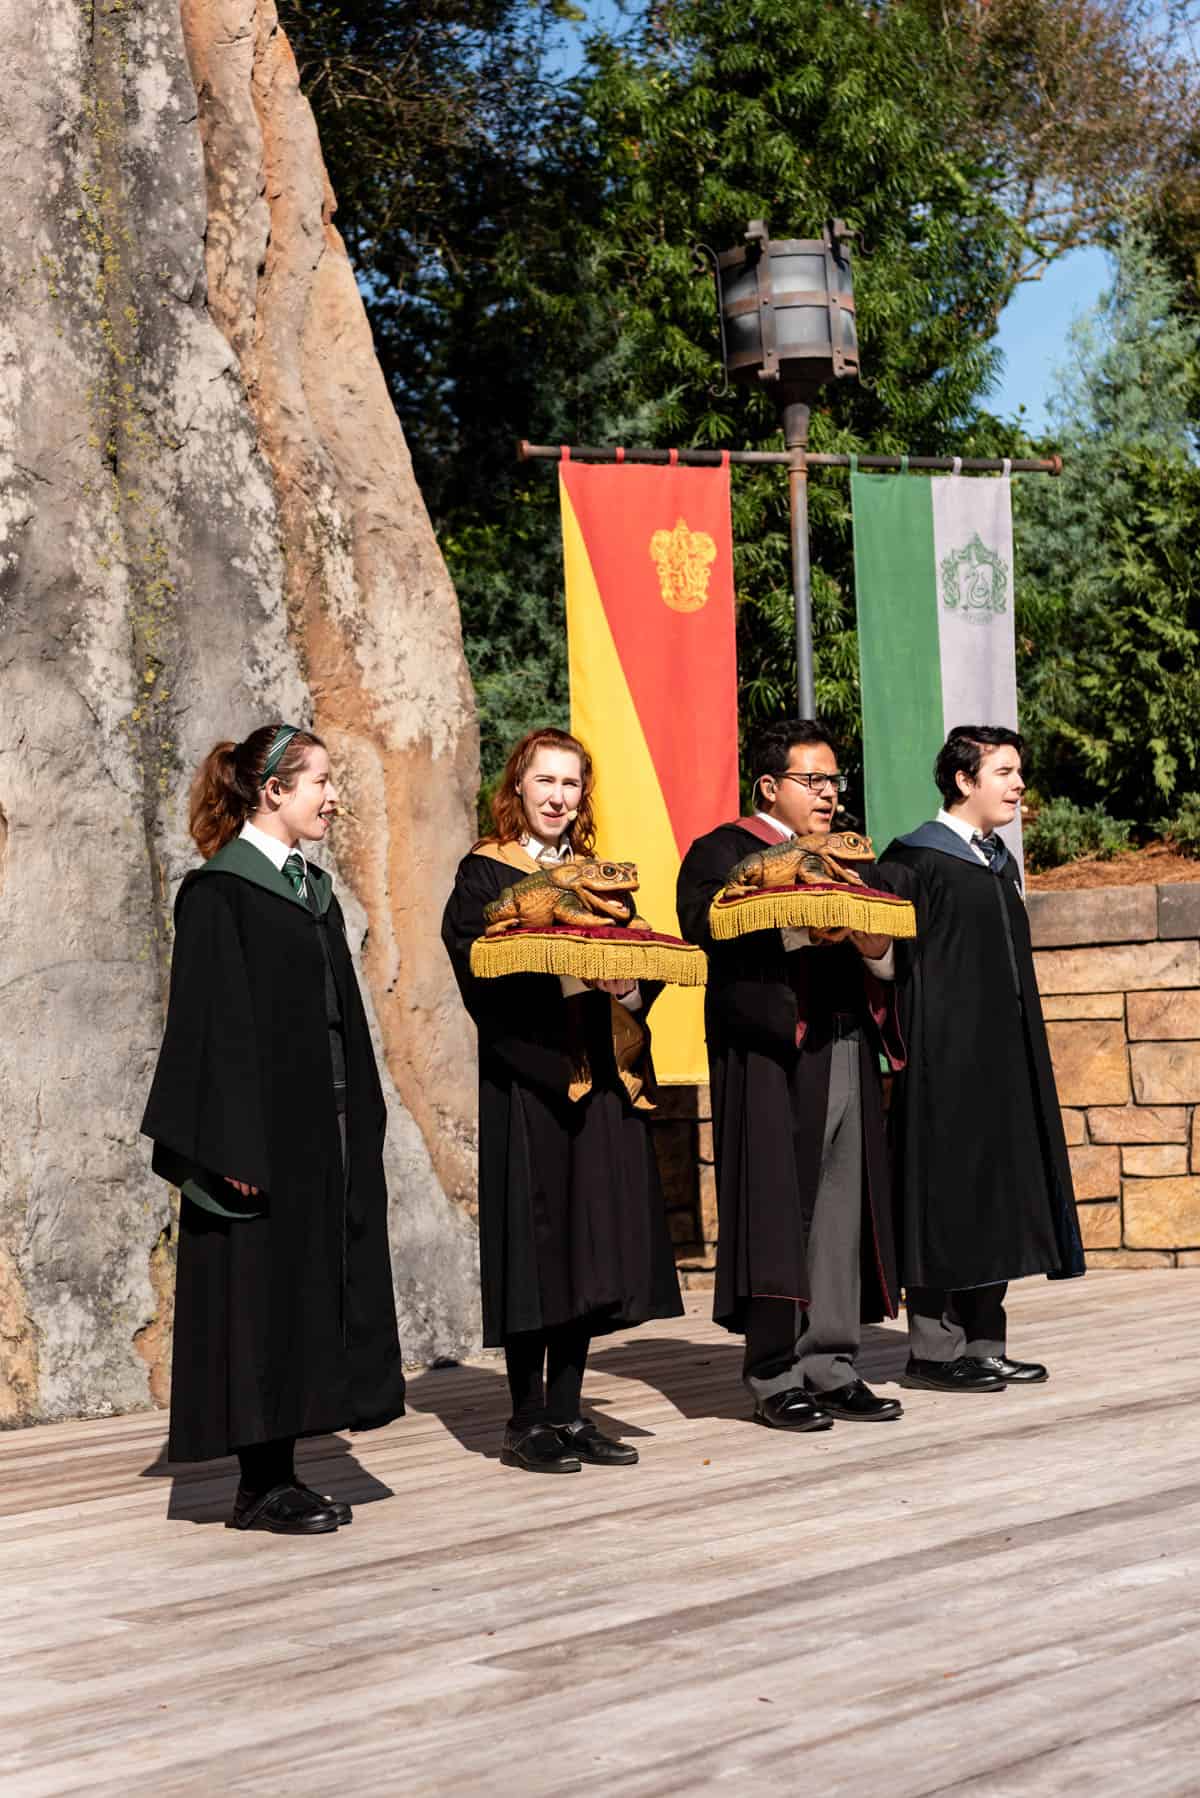 An image of the frog choir at Harry Potter World.